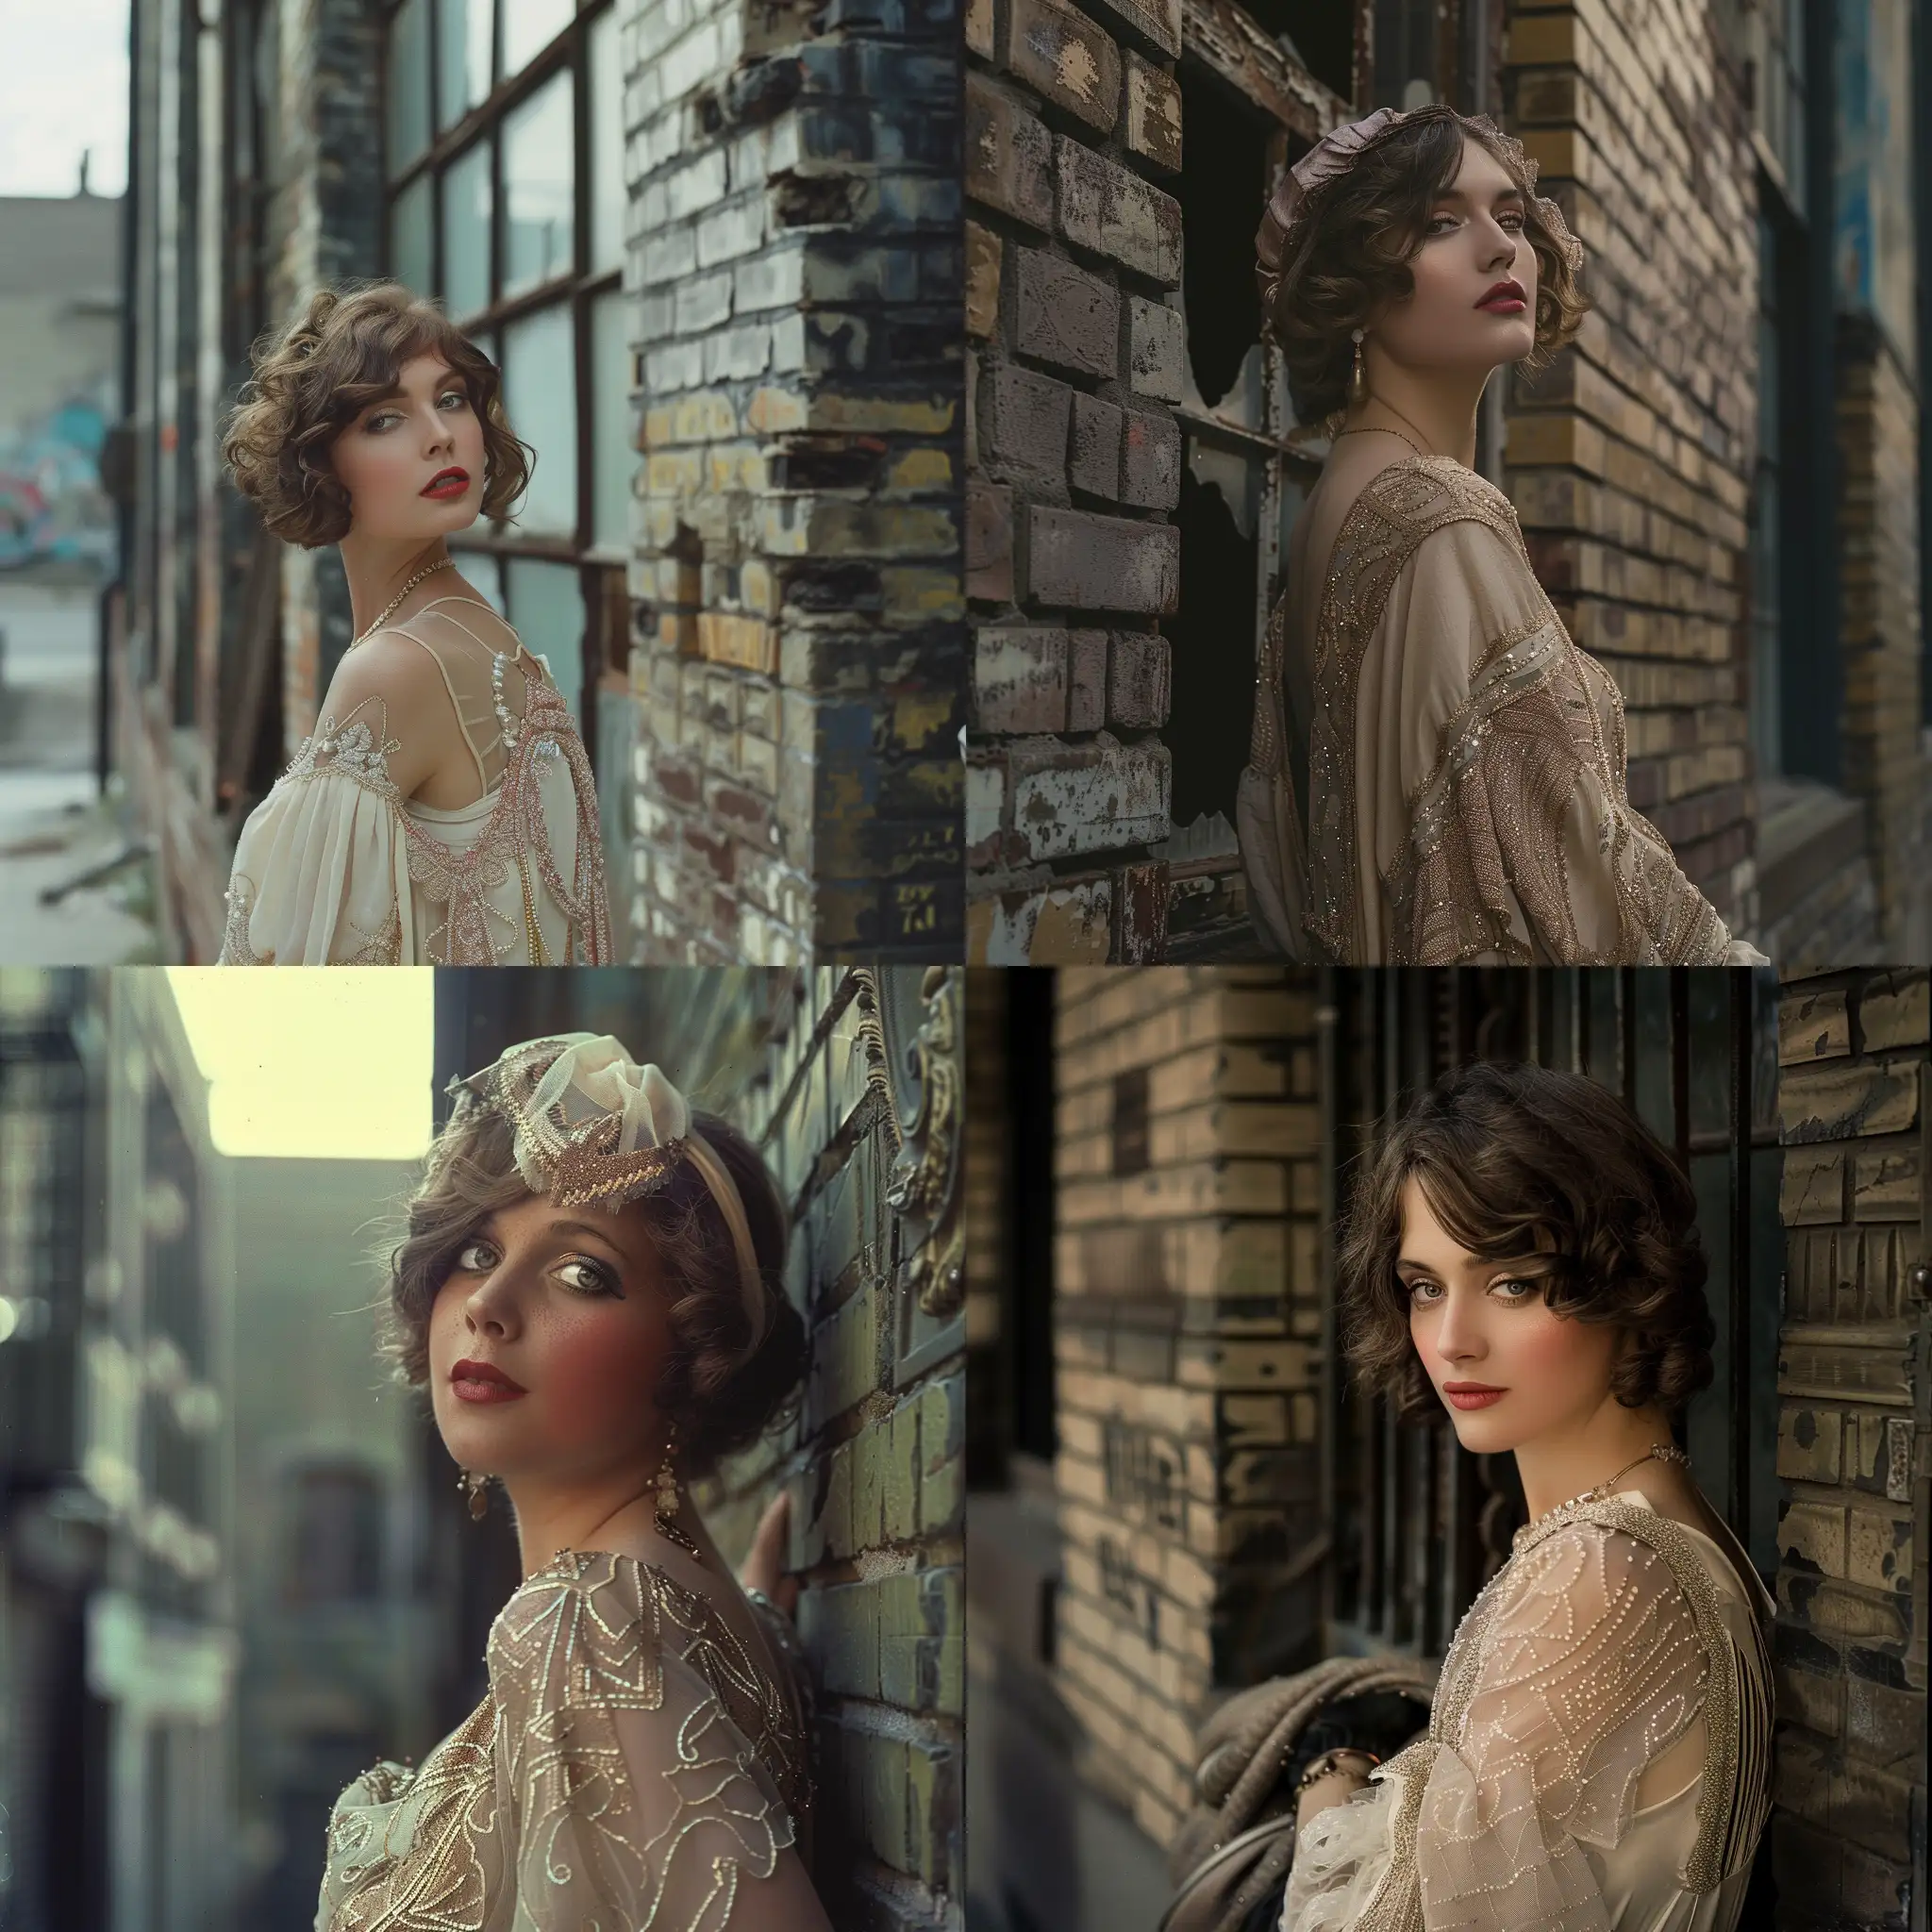 1920s-Fashion-Elegance-Vintage-Portrait-of-a-Stunning-Woman-by-an-Old-Brick-Building